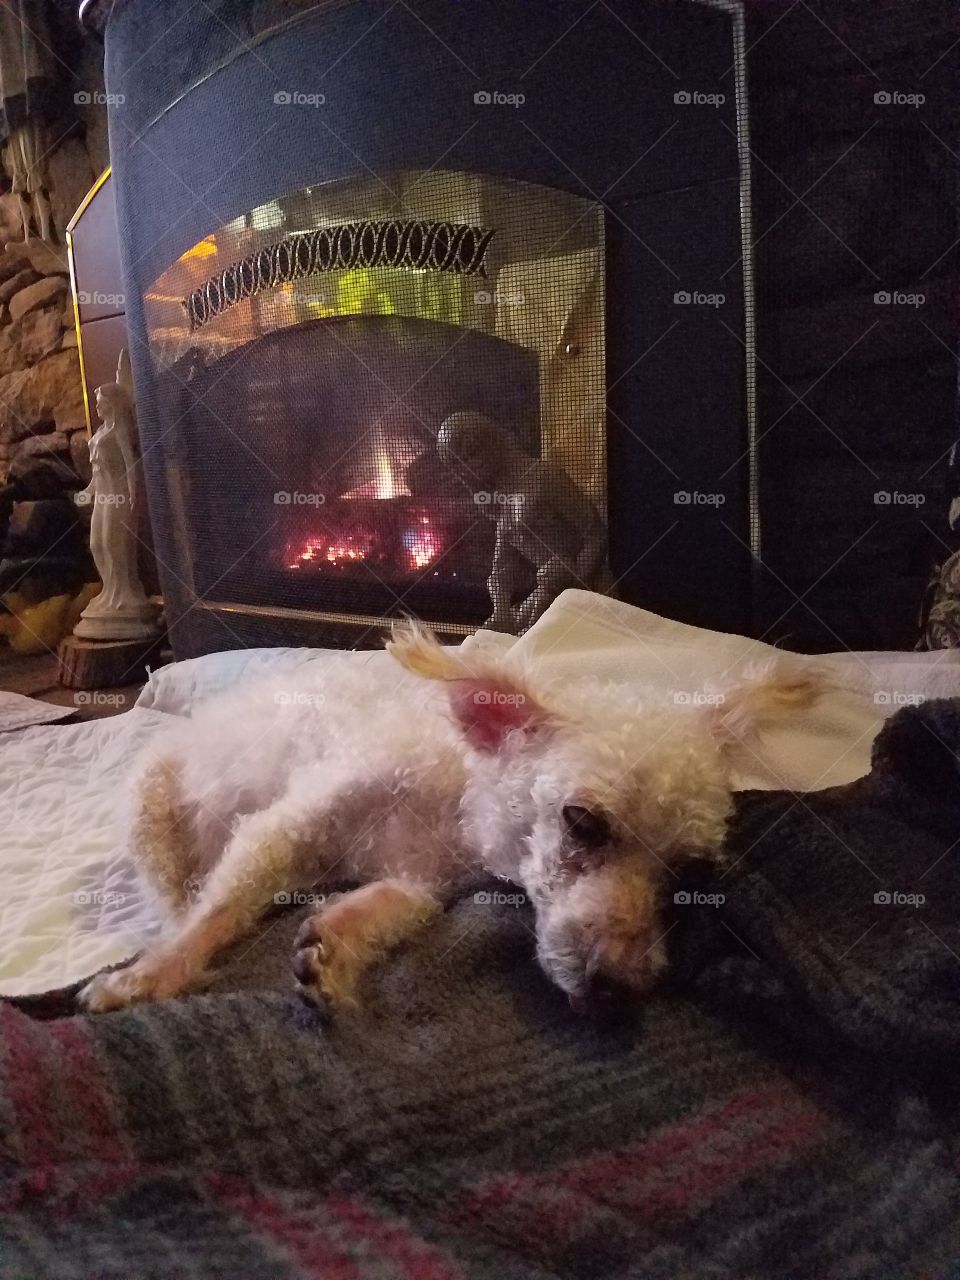 Dog sleeping in bed in front of burning fireplace.🐾